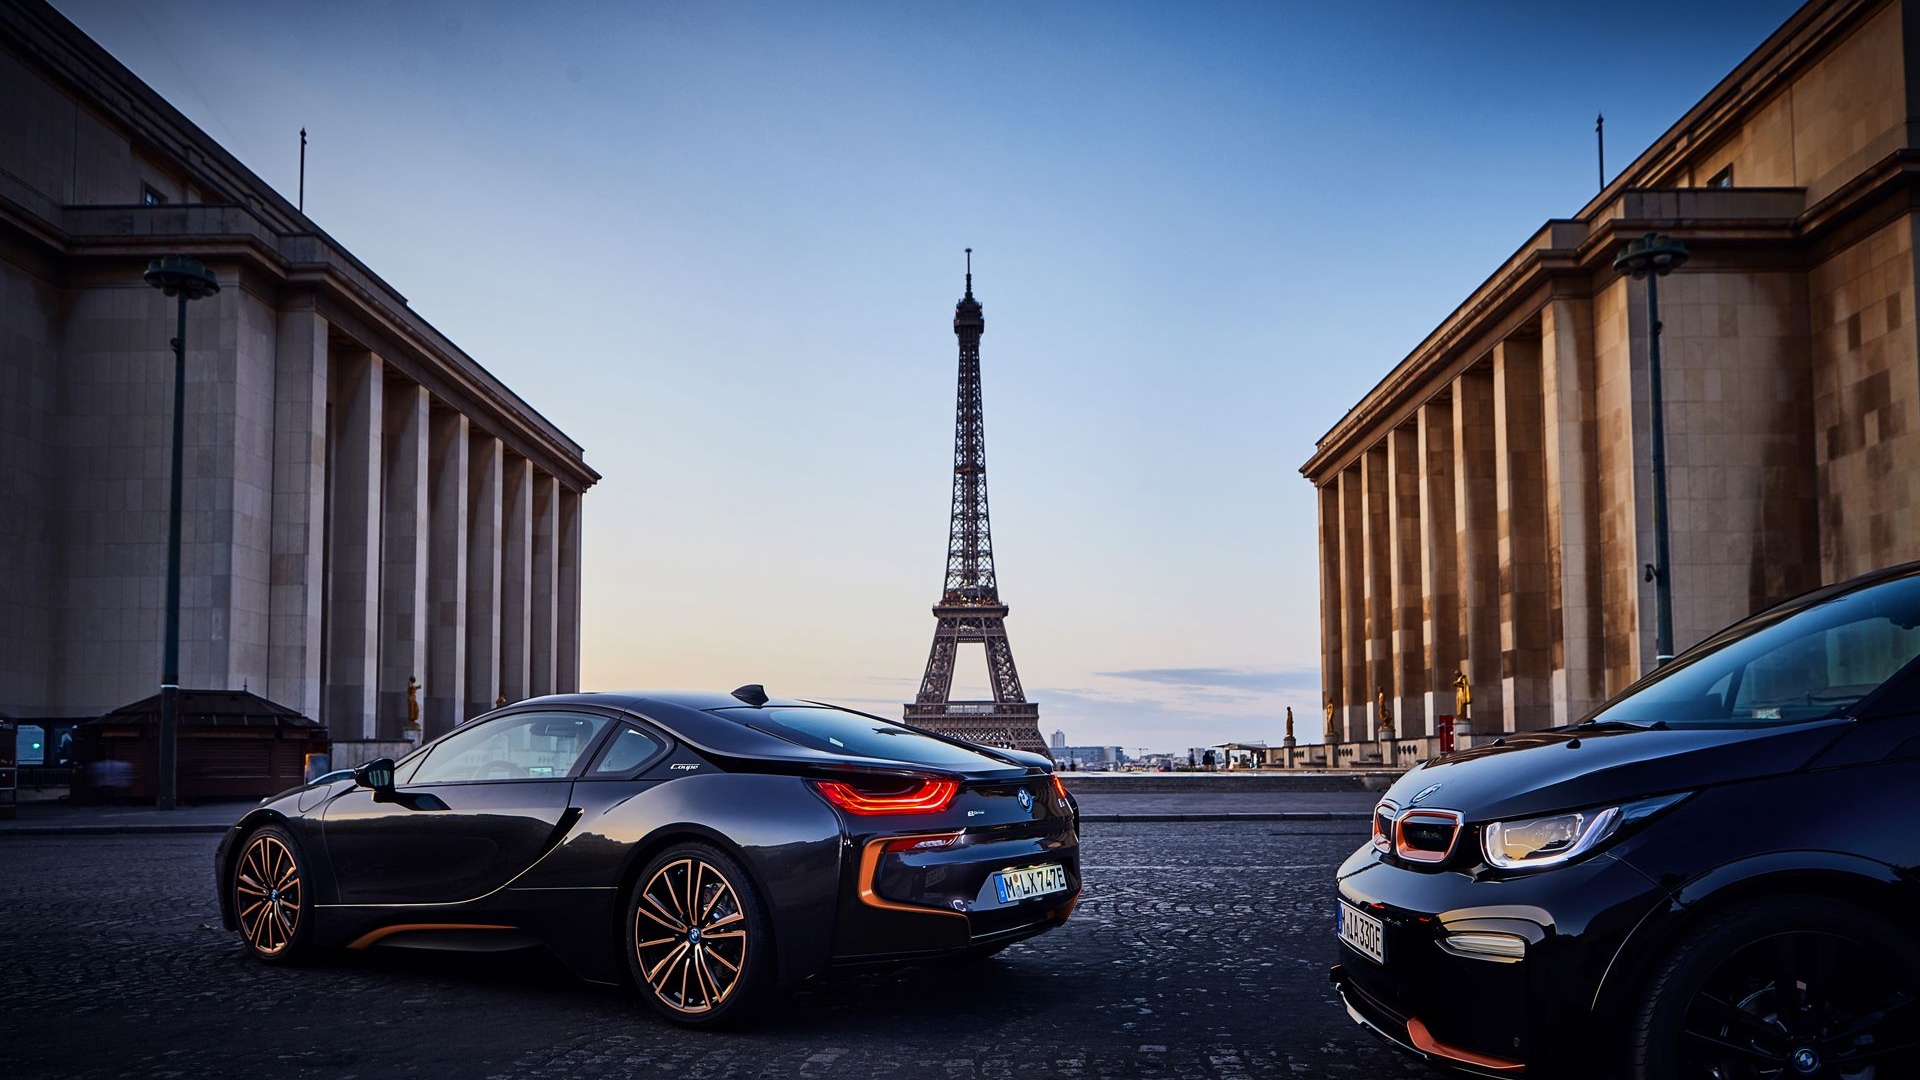 2020 BMW i3s Edition RoadStyle and i8 Ultimate Sophisto Editions